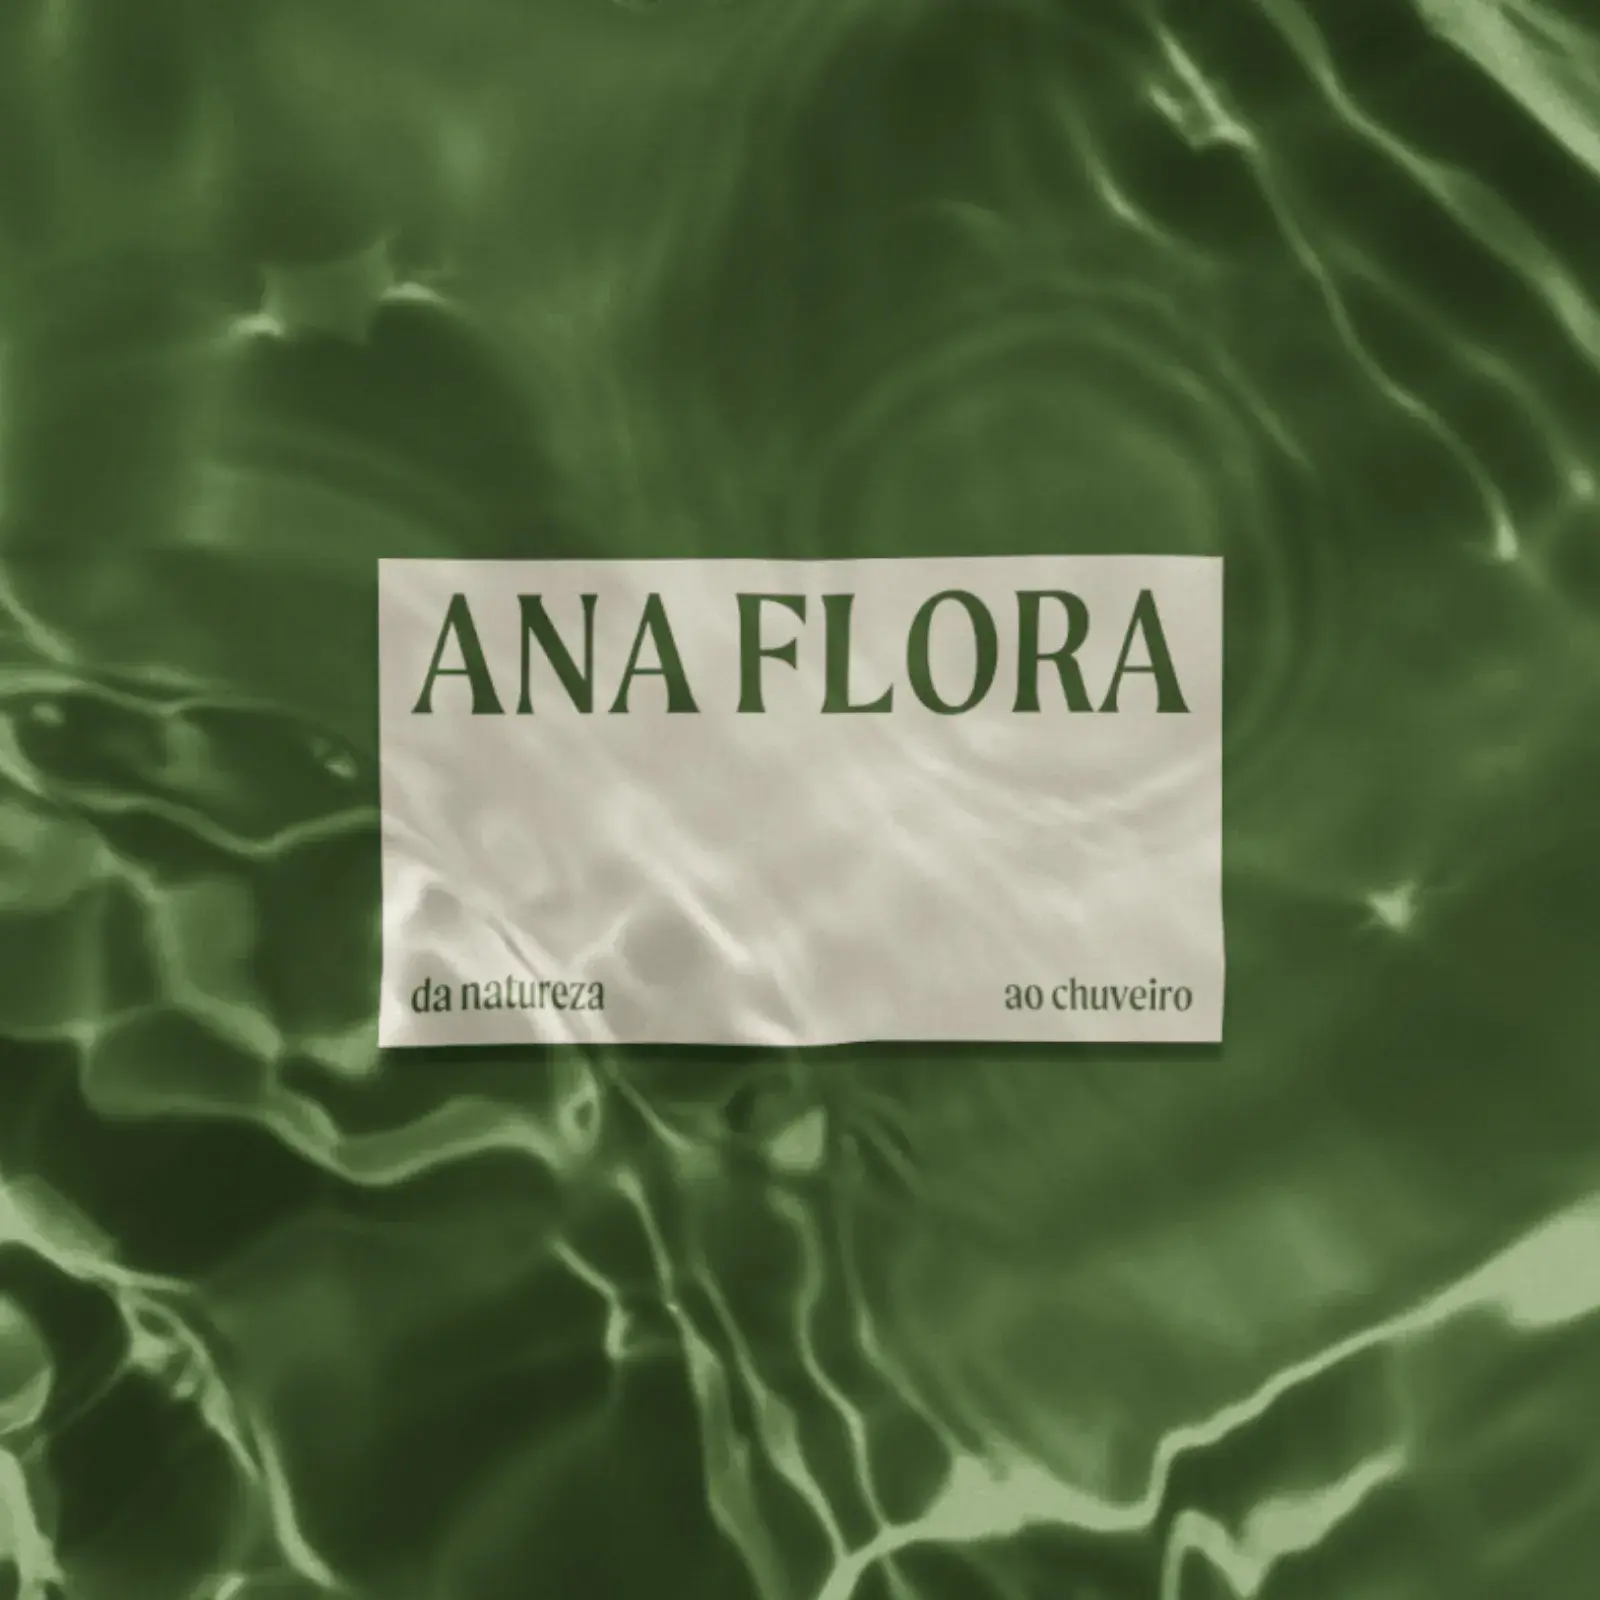 Branding for Ana Flora symbolizing the endless cycles of nature